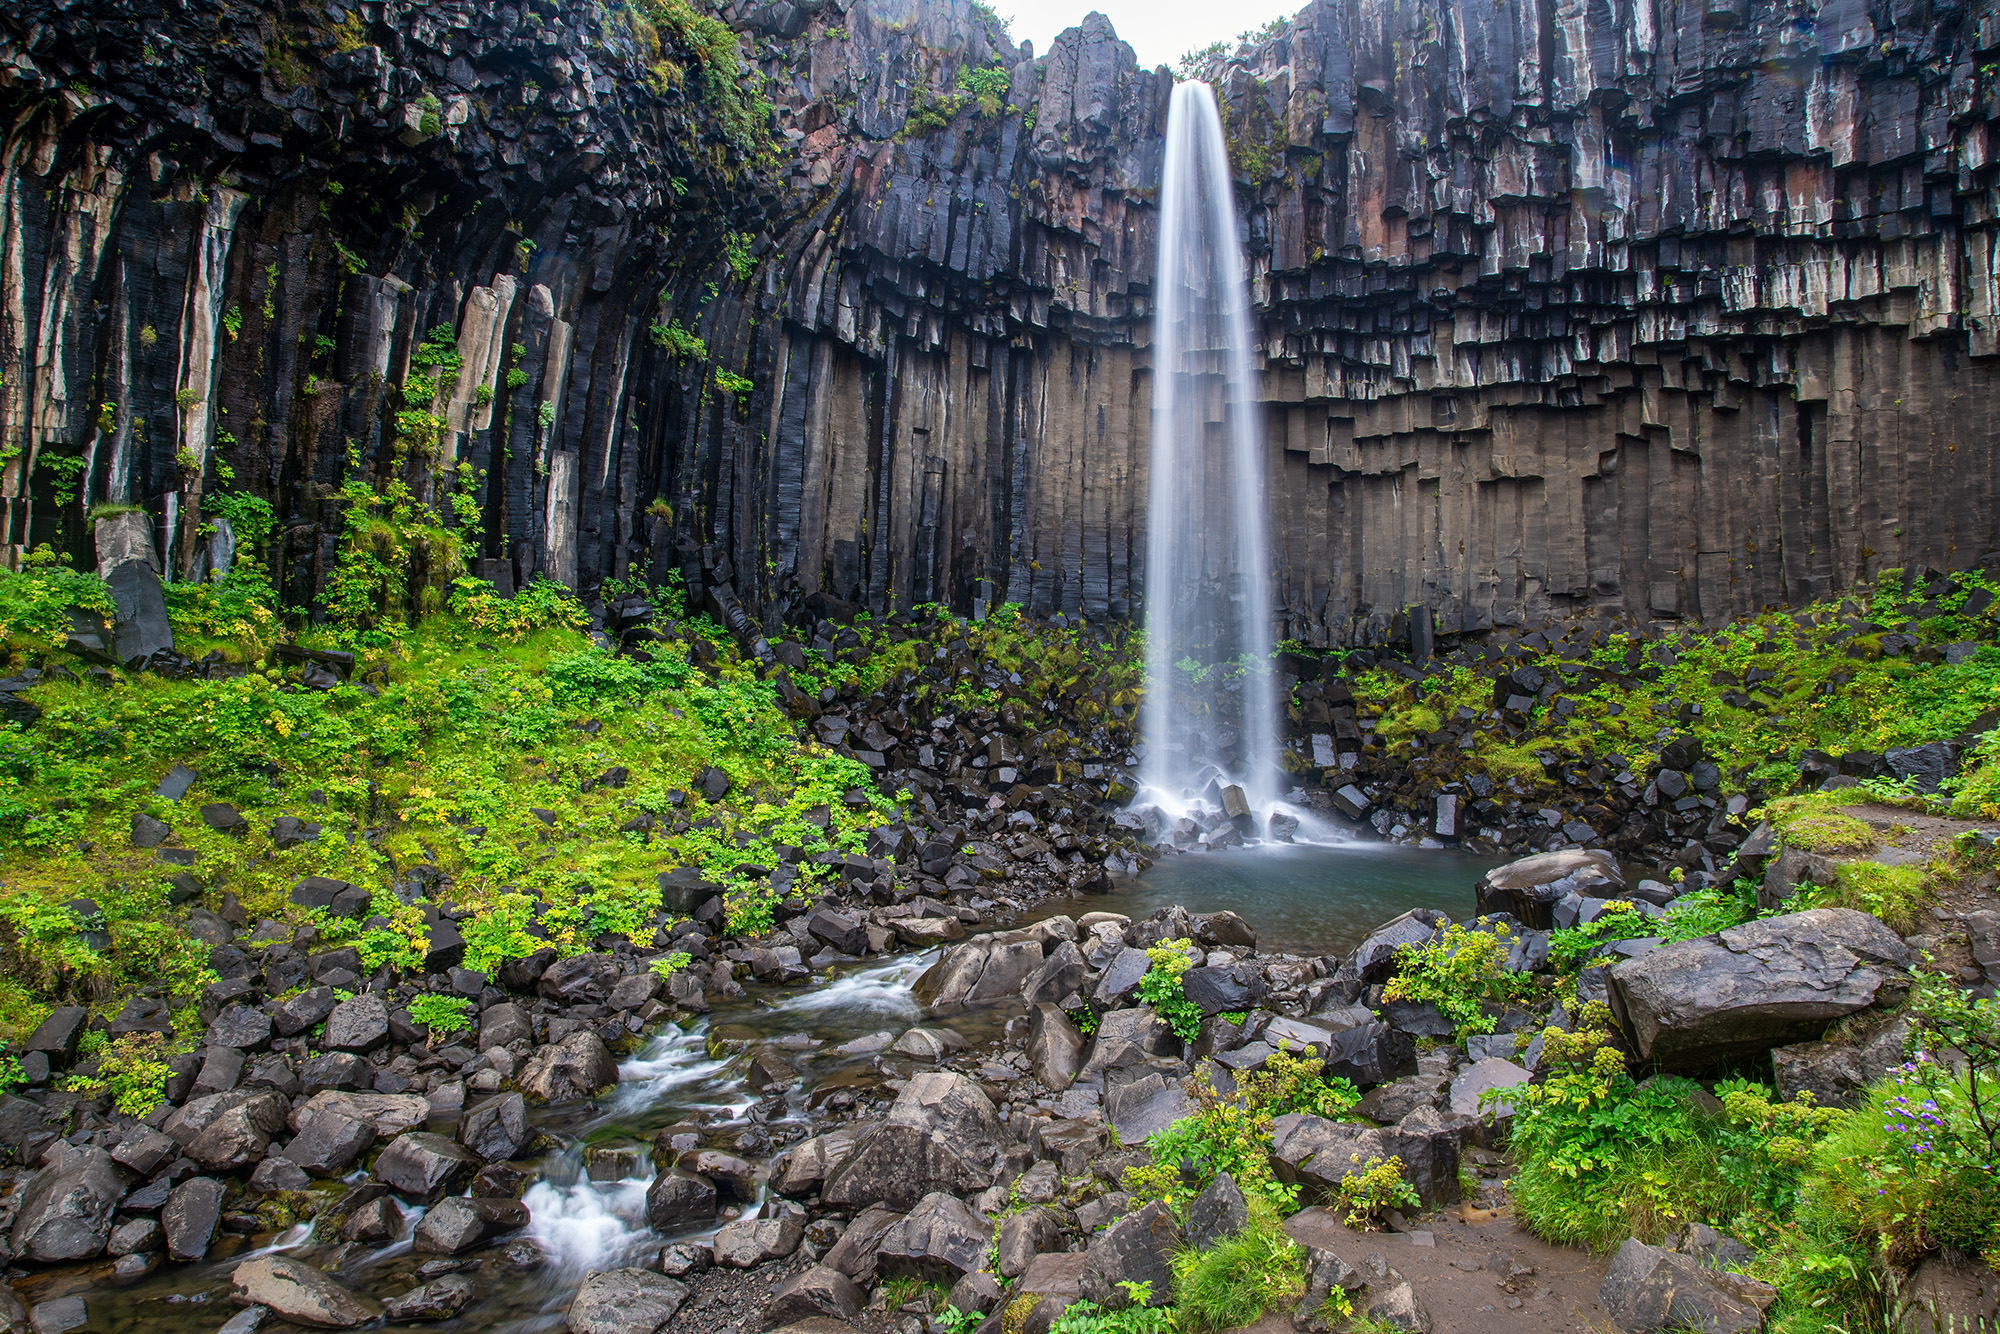 This image captures the grandeur of Svartifoss waterfall in Skaftafell National Park, Iceland. Presented in a horizontal composition...